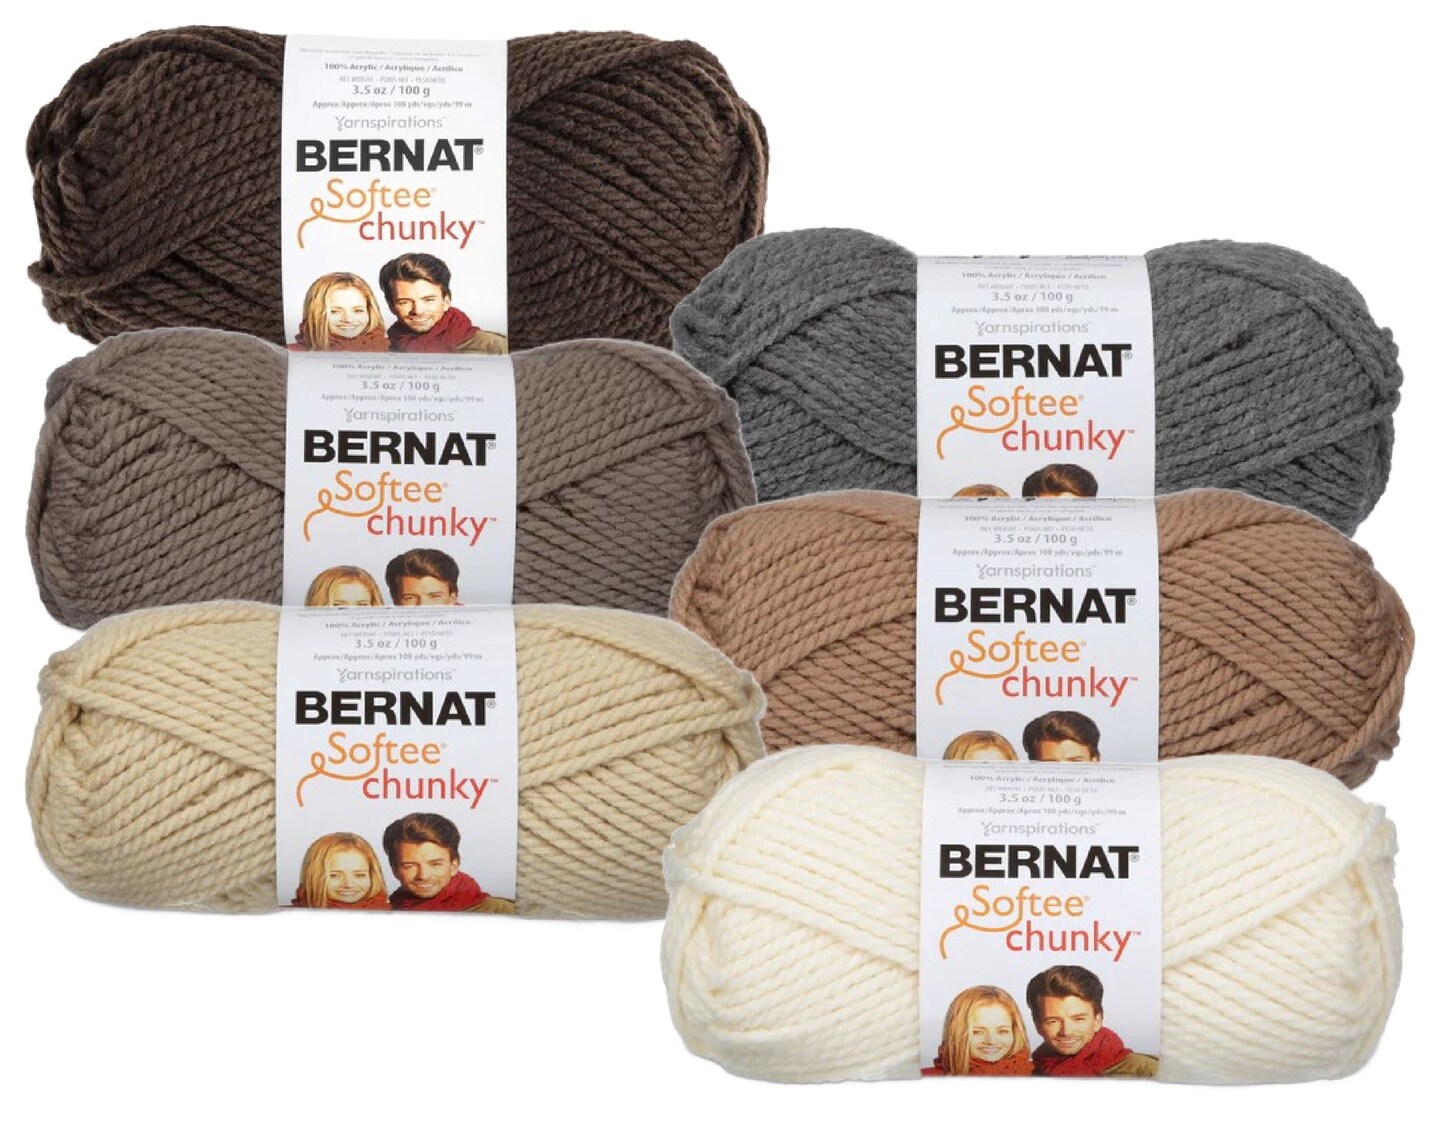 3 Pack of 100% Pure Cotton Crochet Yarn by Threadart | Lt. Beige | 50 gram  Skeins | Worsted Medium #4 Yarn | 85 yds per Skein - 30 Colors Available